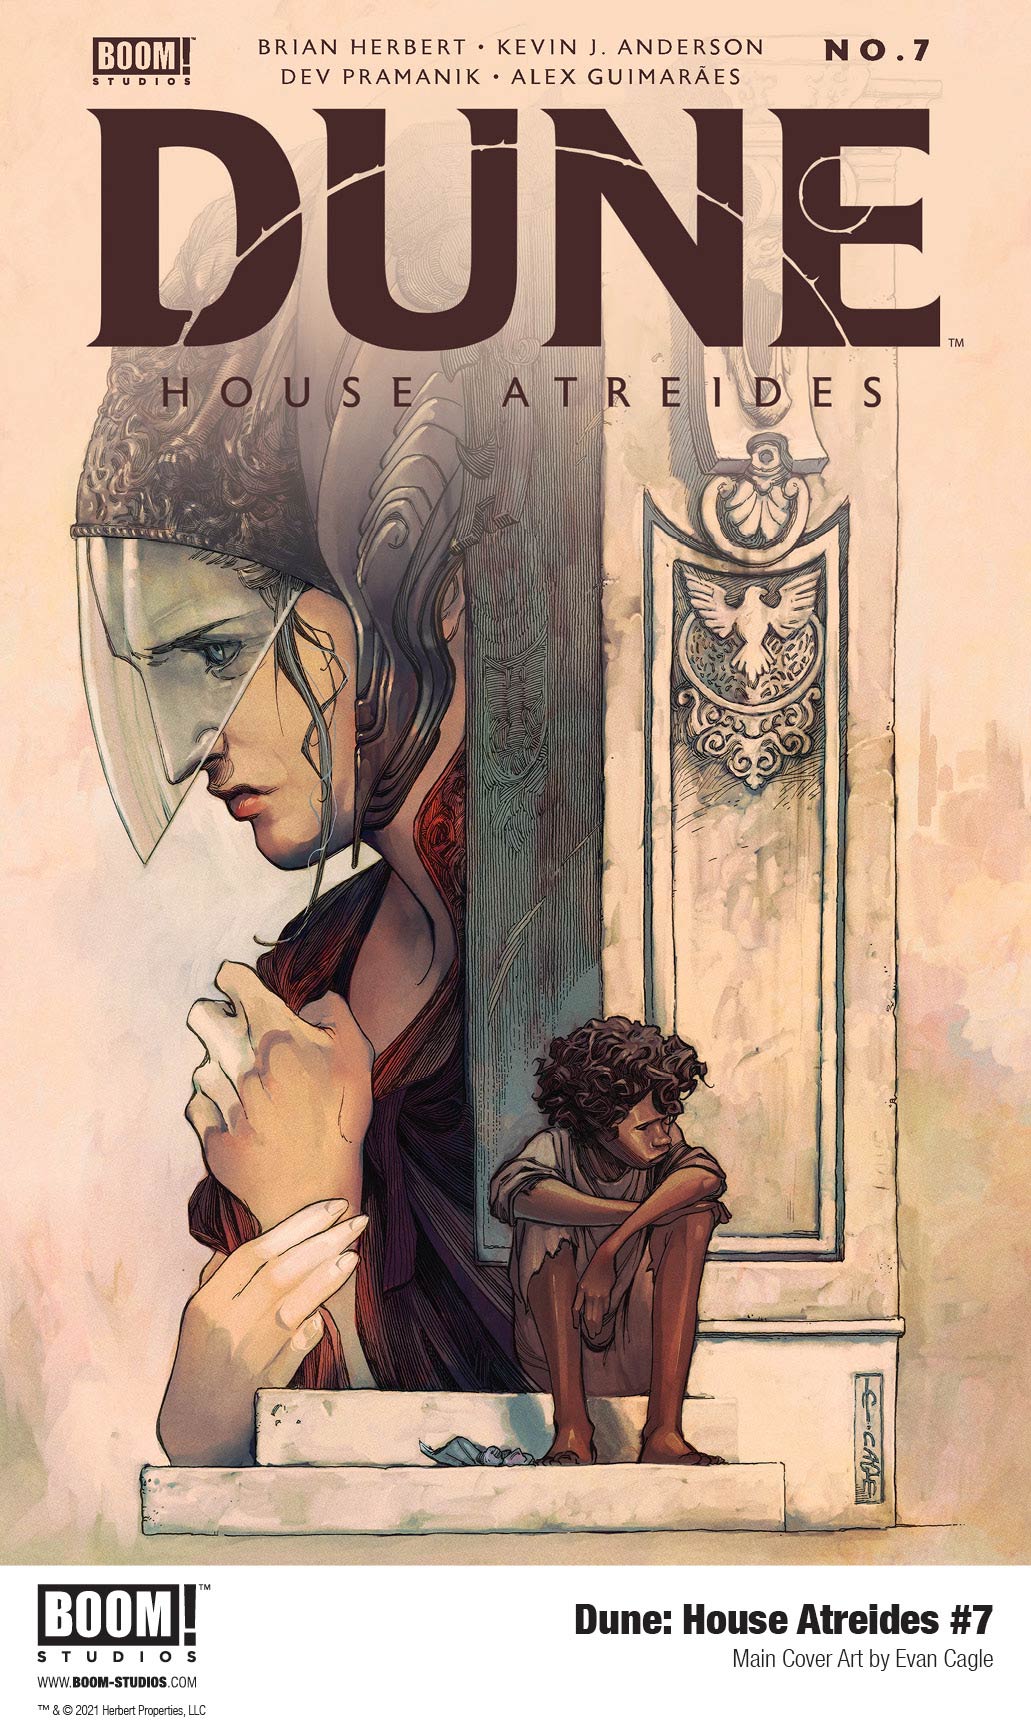 Dune: House Atreides comic series. Main cover art for issue #7 by Evan Cagle.